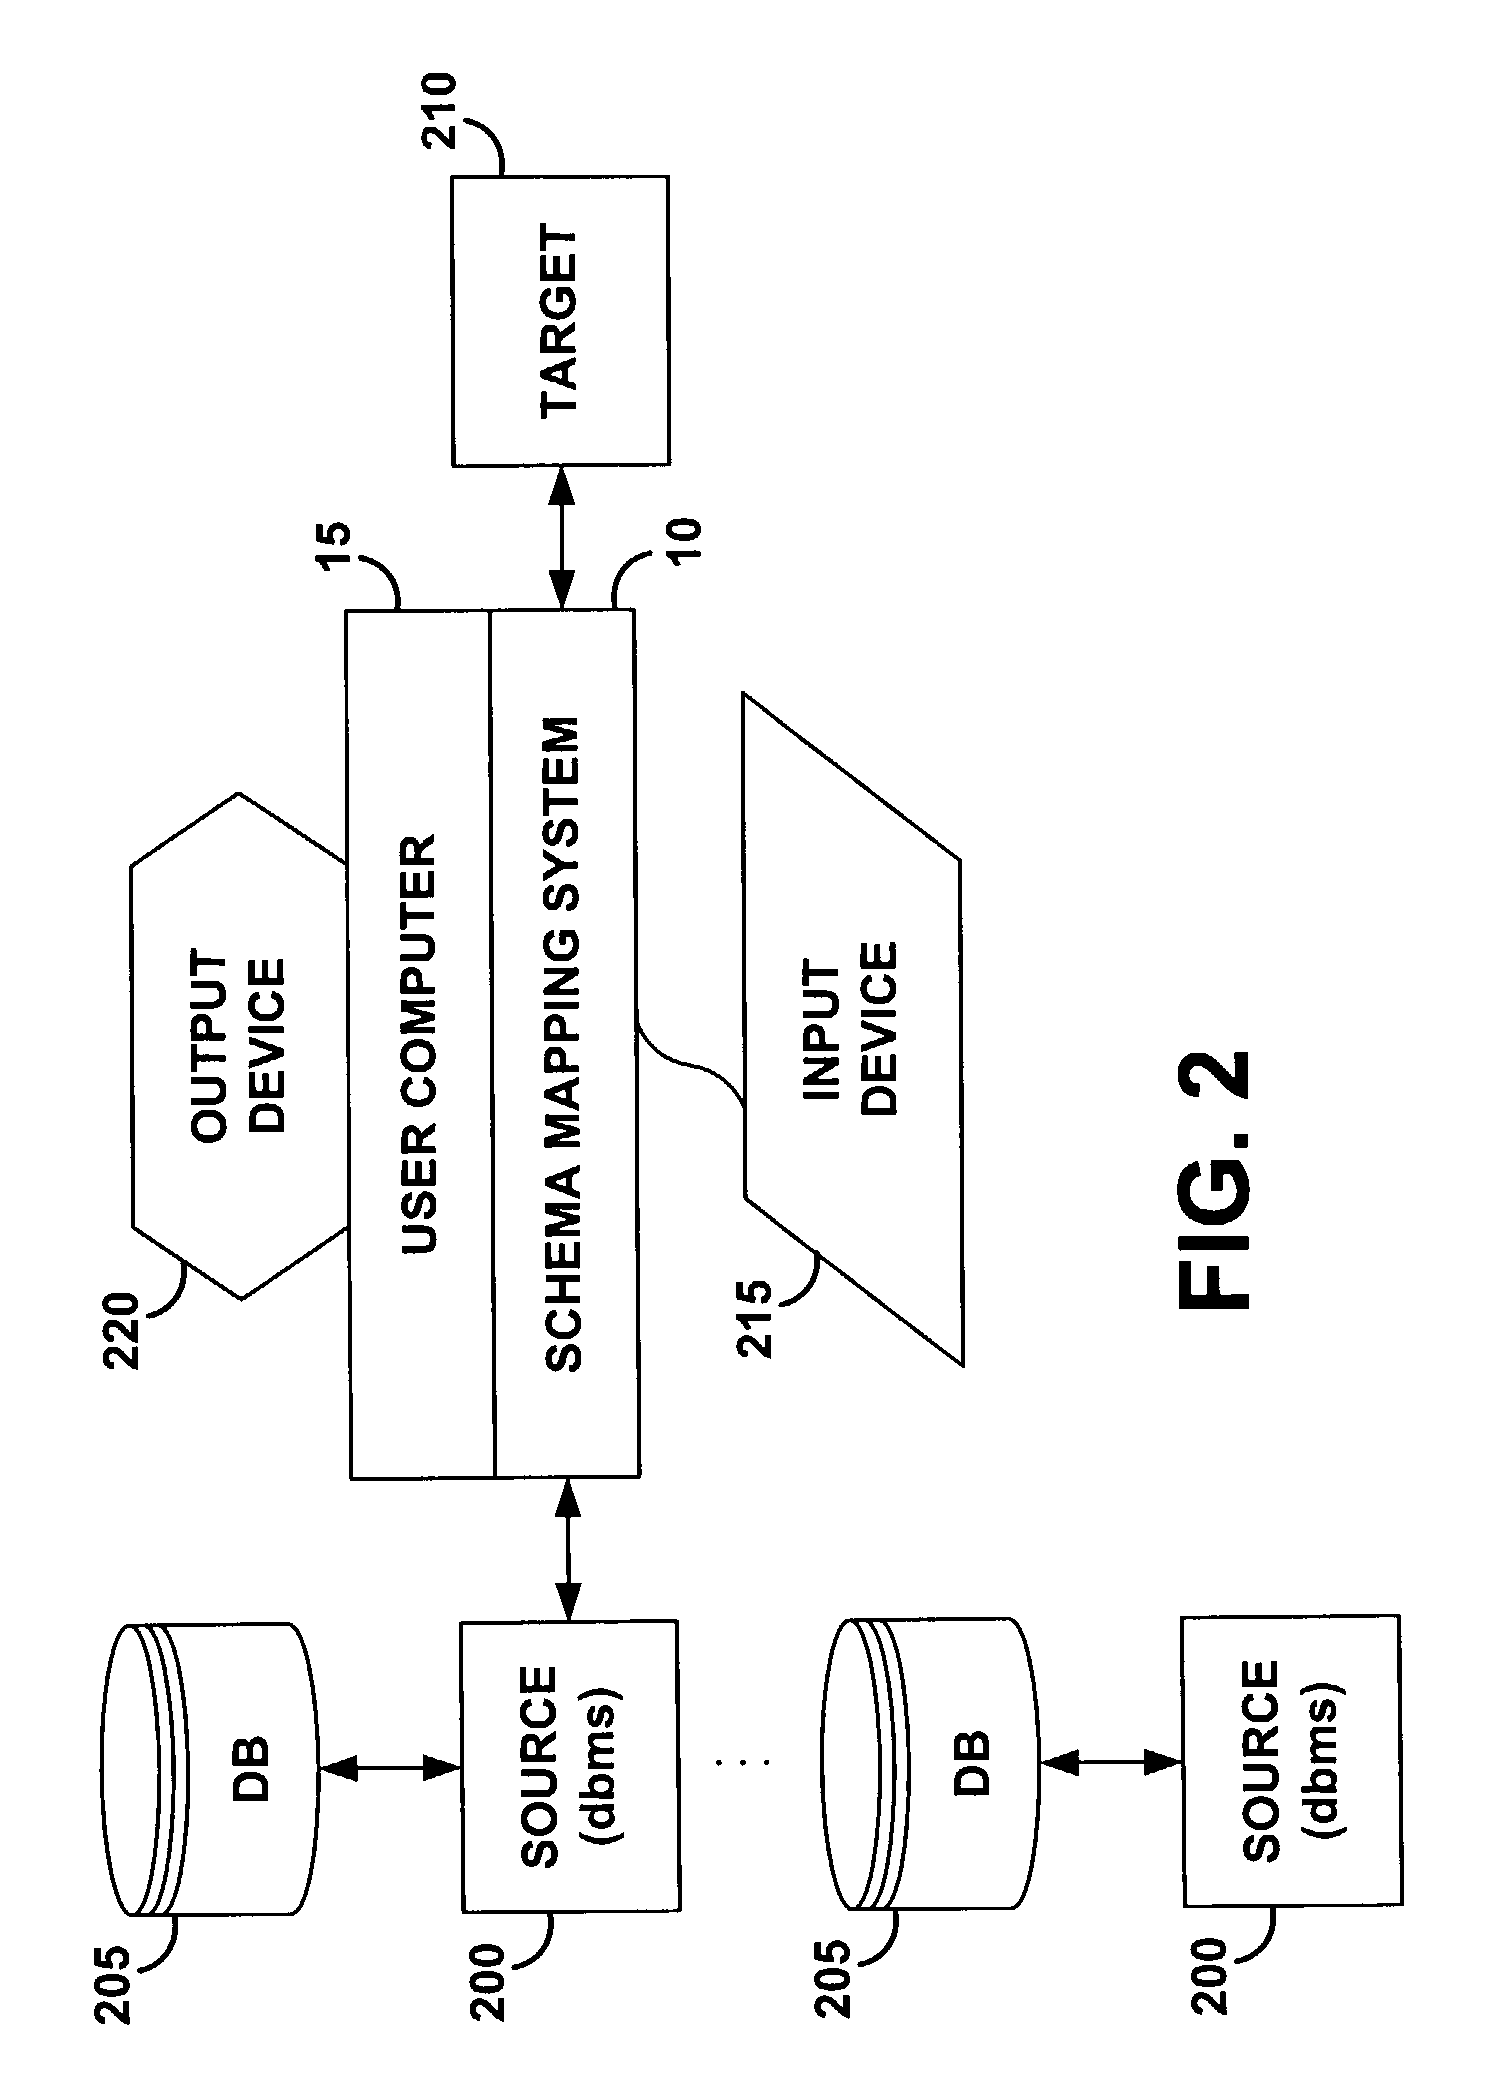 Method for schema mapping and data transformation